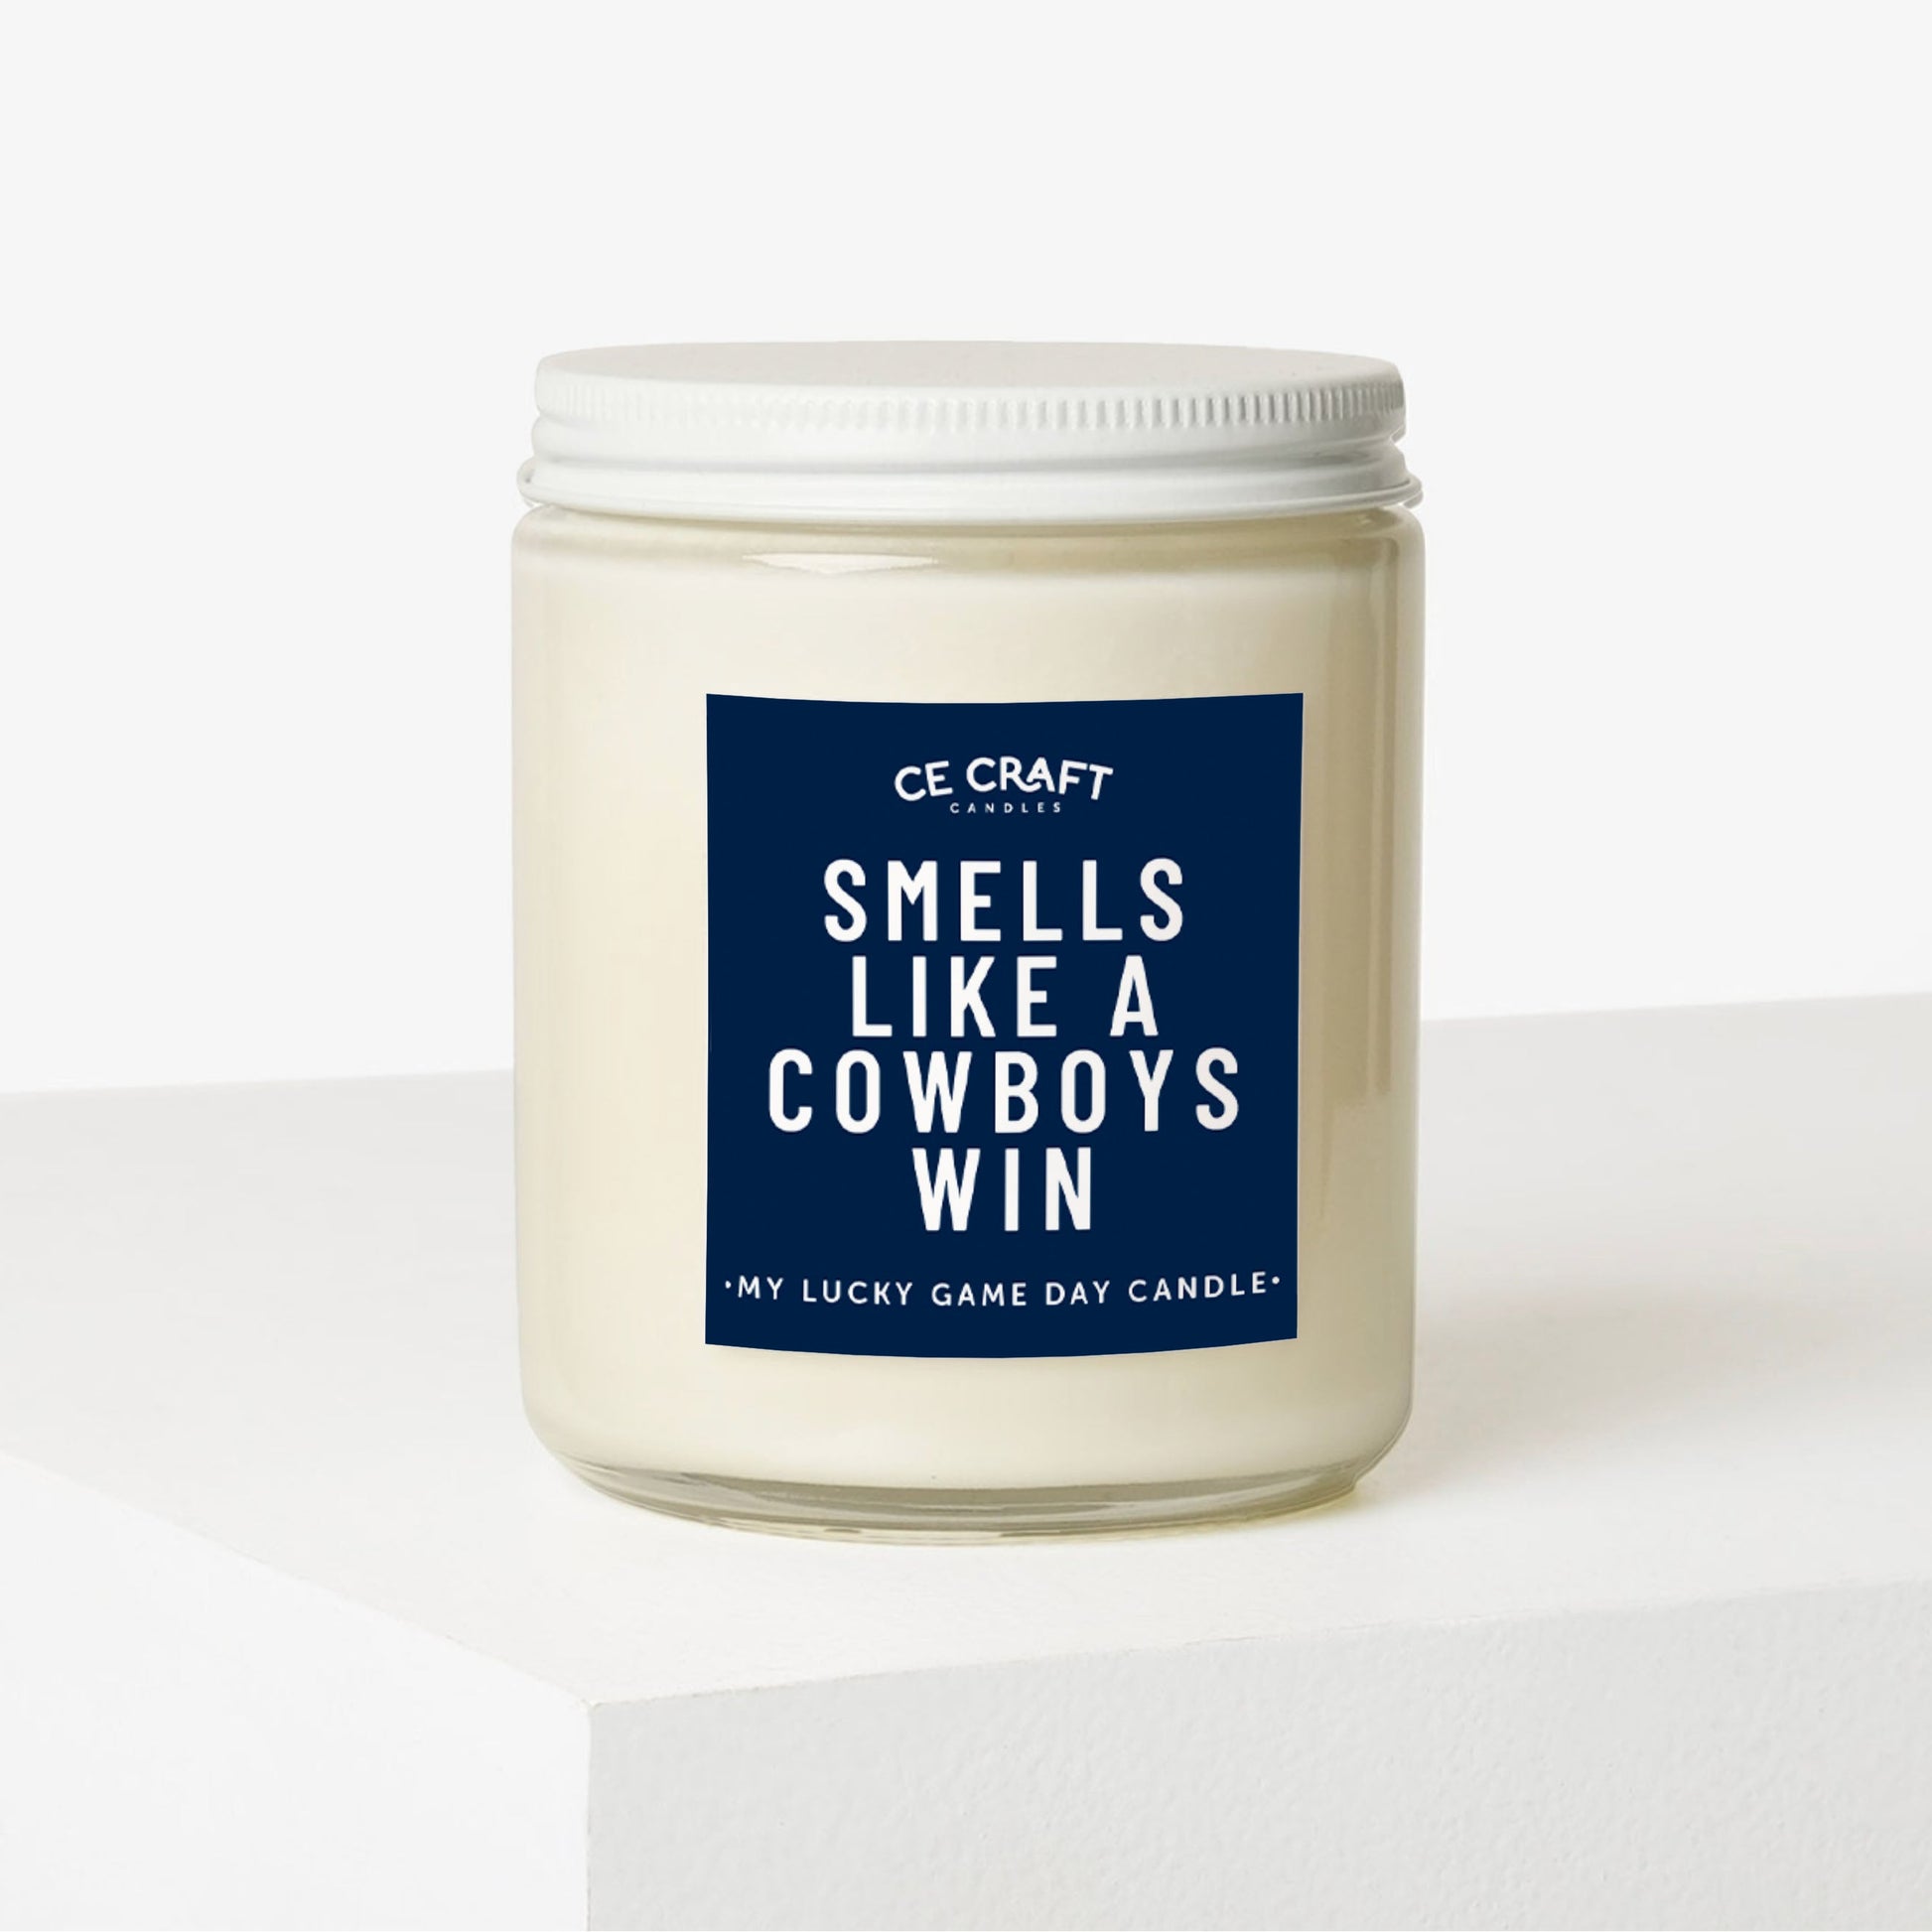 Smells Like a Cowboys Win Scented Candle Candles CE Craft 